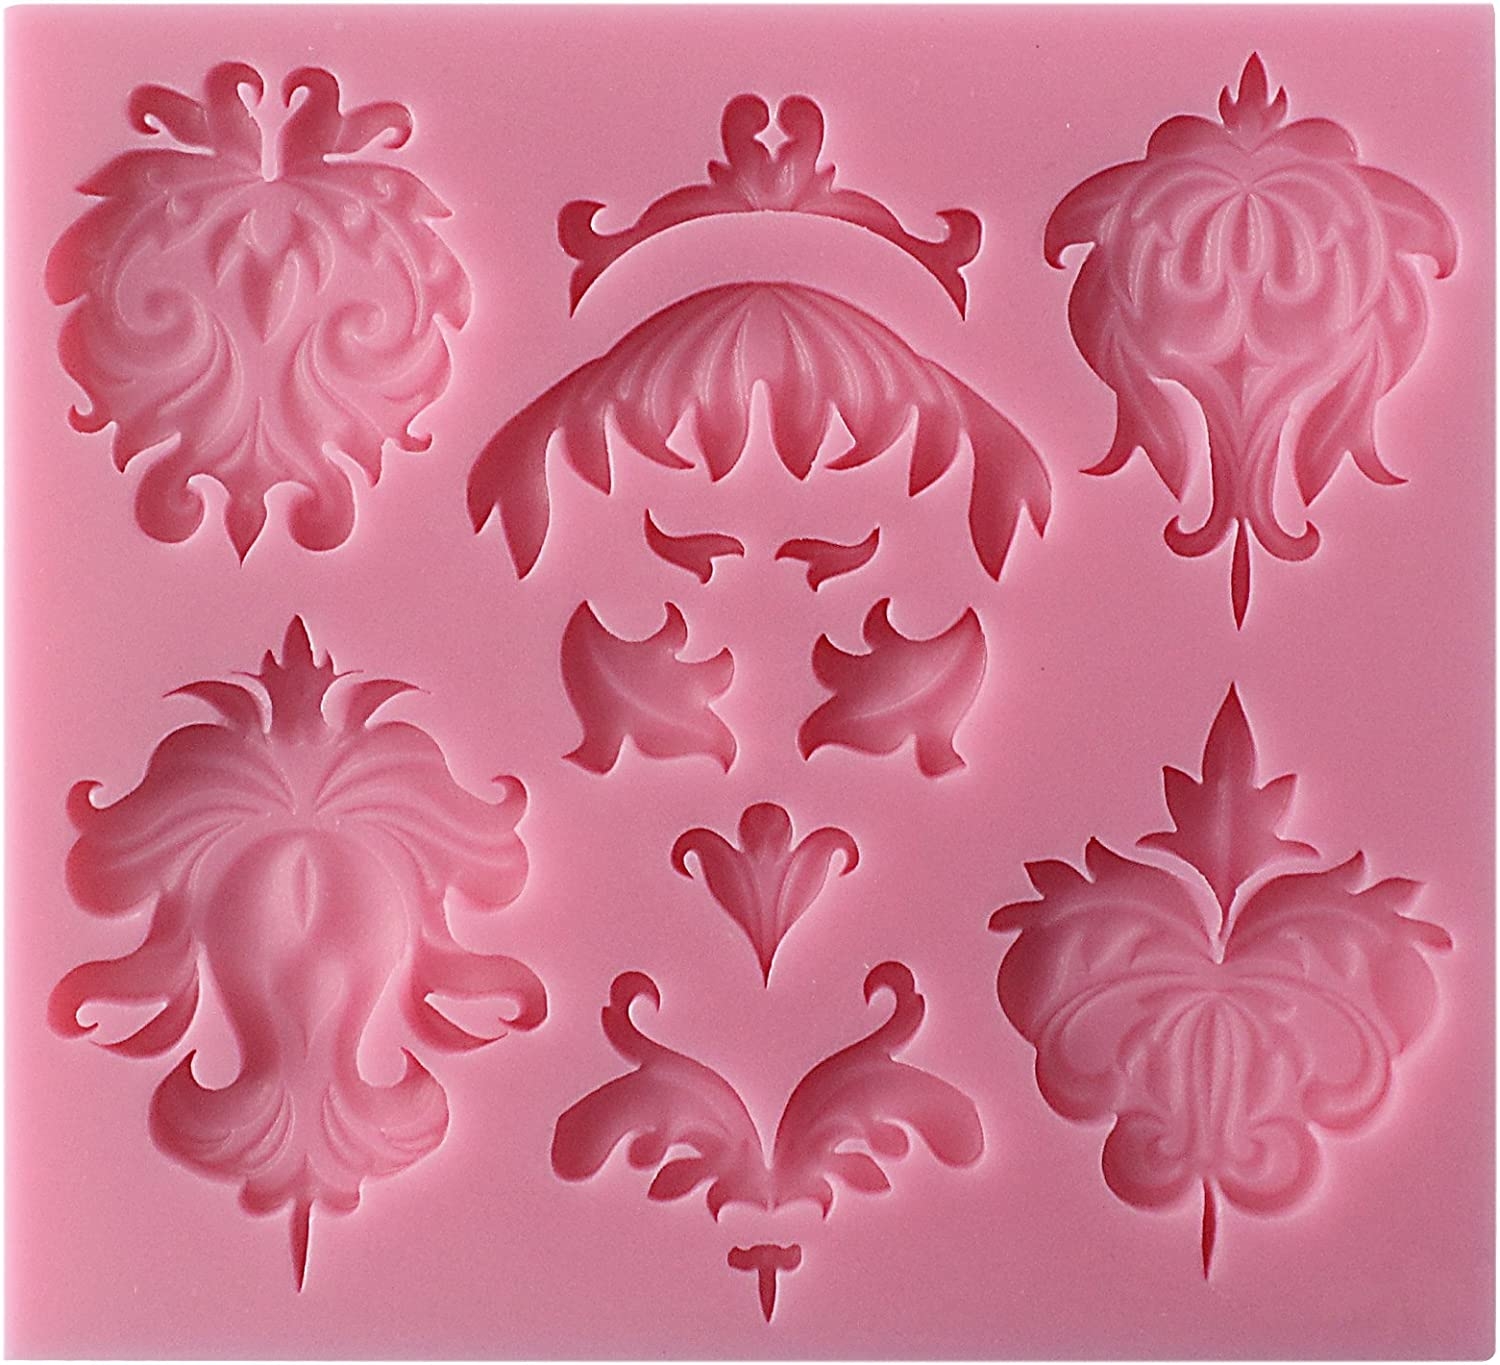 Funshowcase Baroque Style Curlicues Scroll Lace Fondant Silicone Mold for Sugarcraft, Cake Border Decoration, Cupcake Topper,